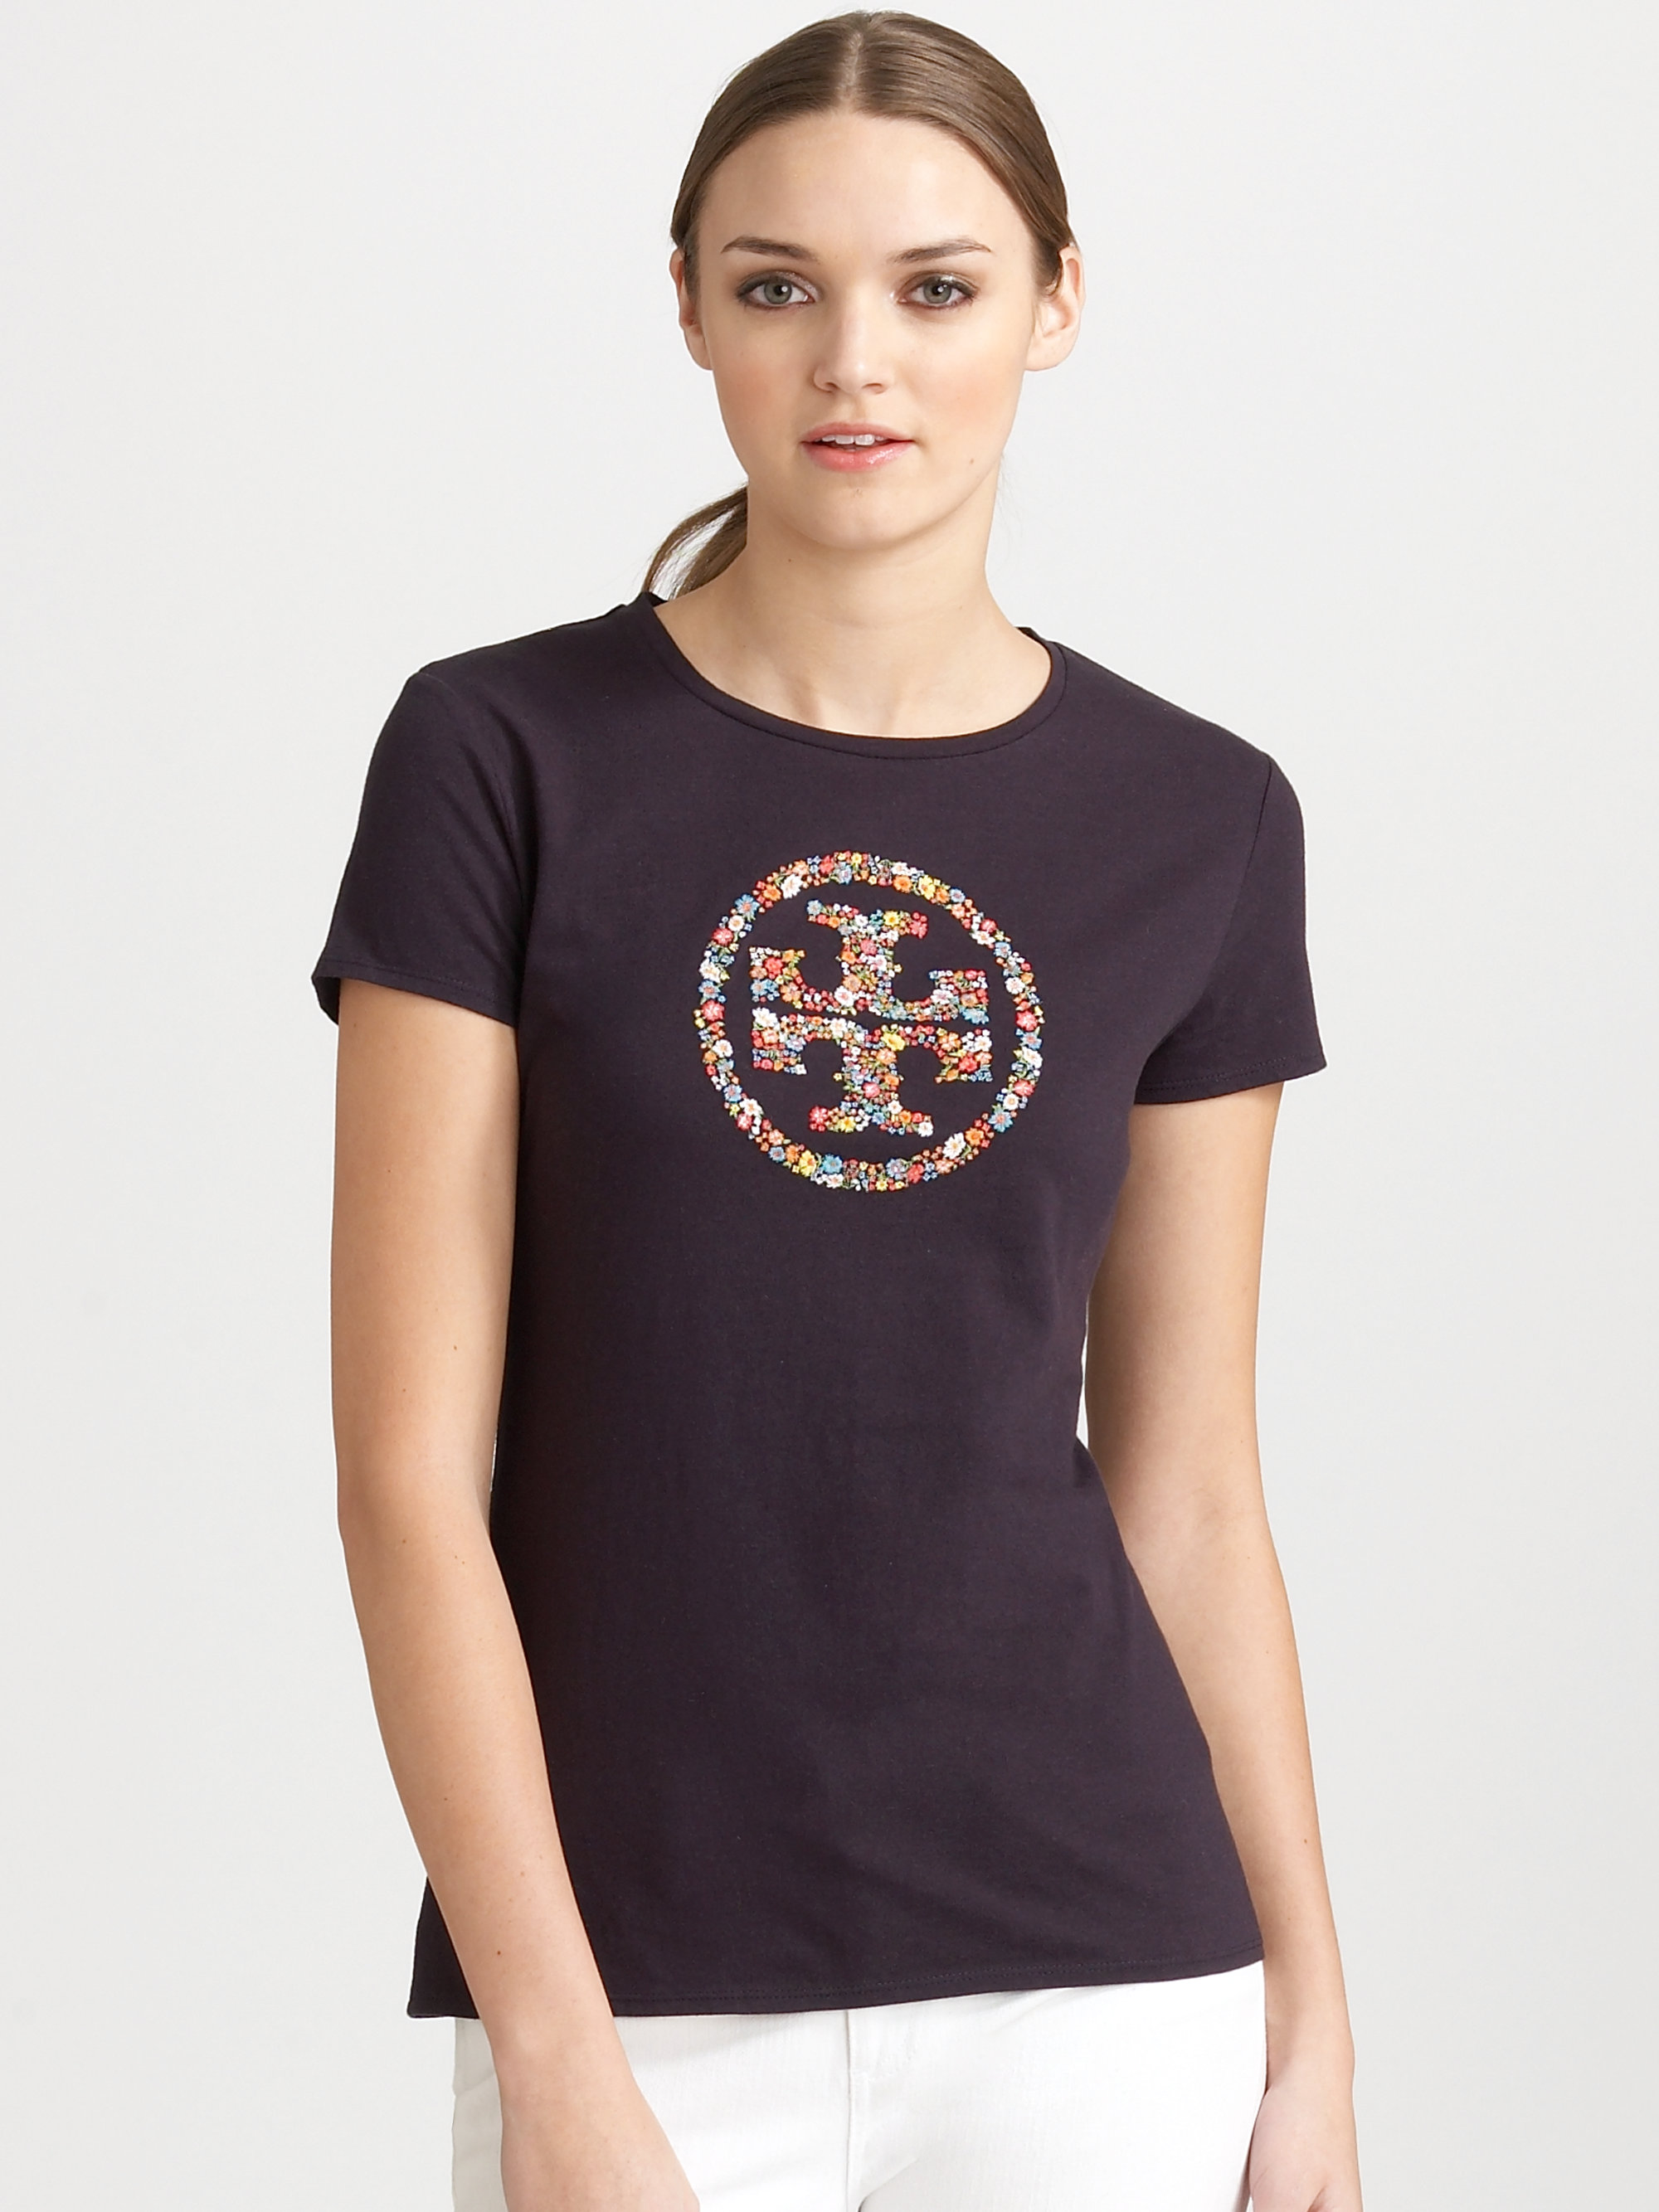 Tory Burch Embroidered Logo Tshirt in ...